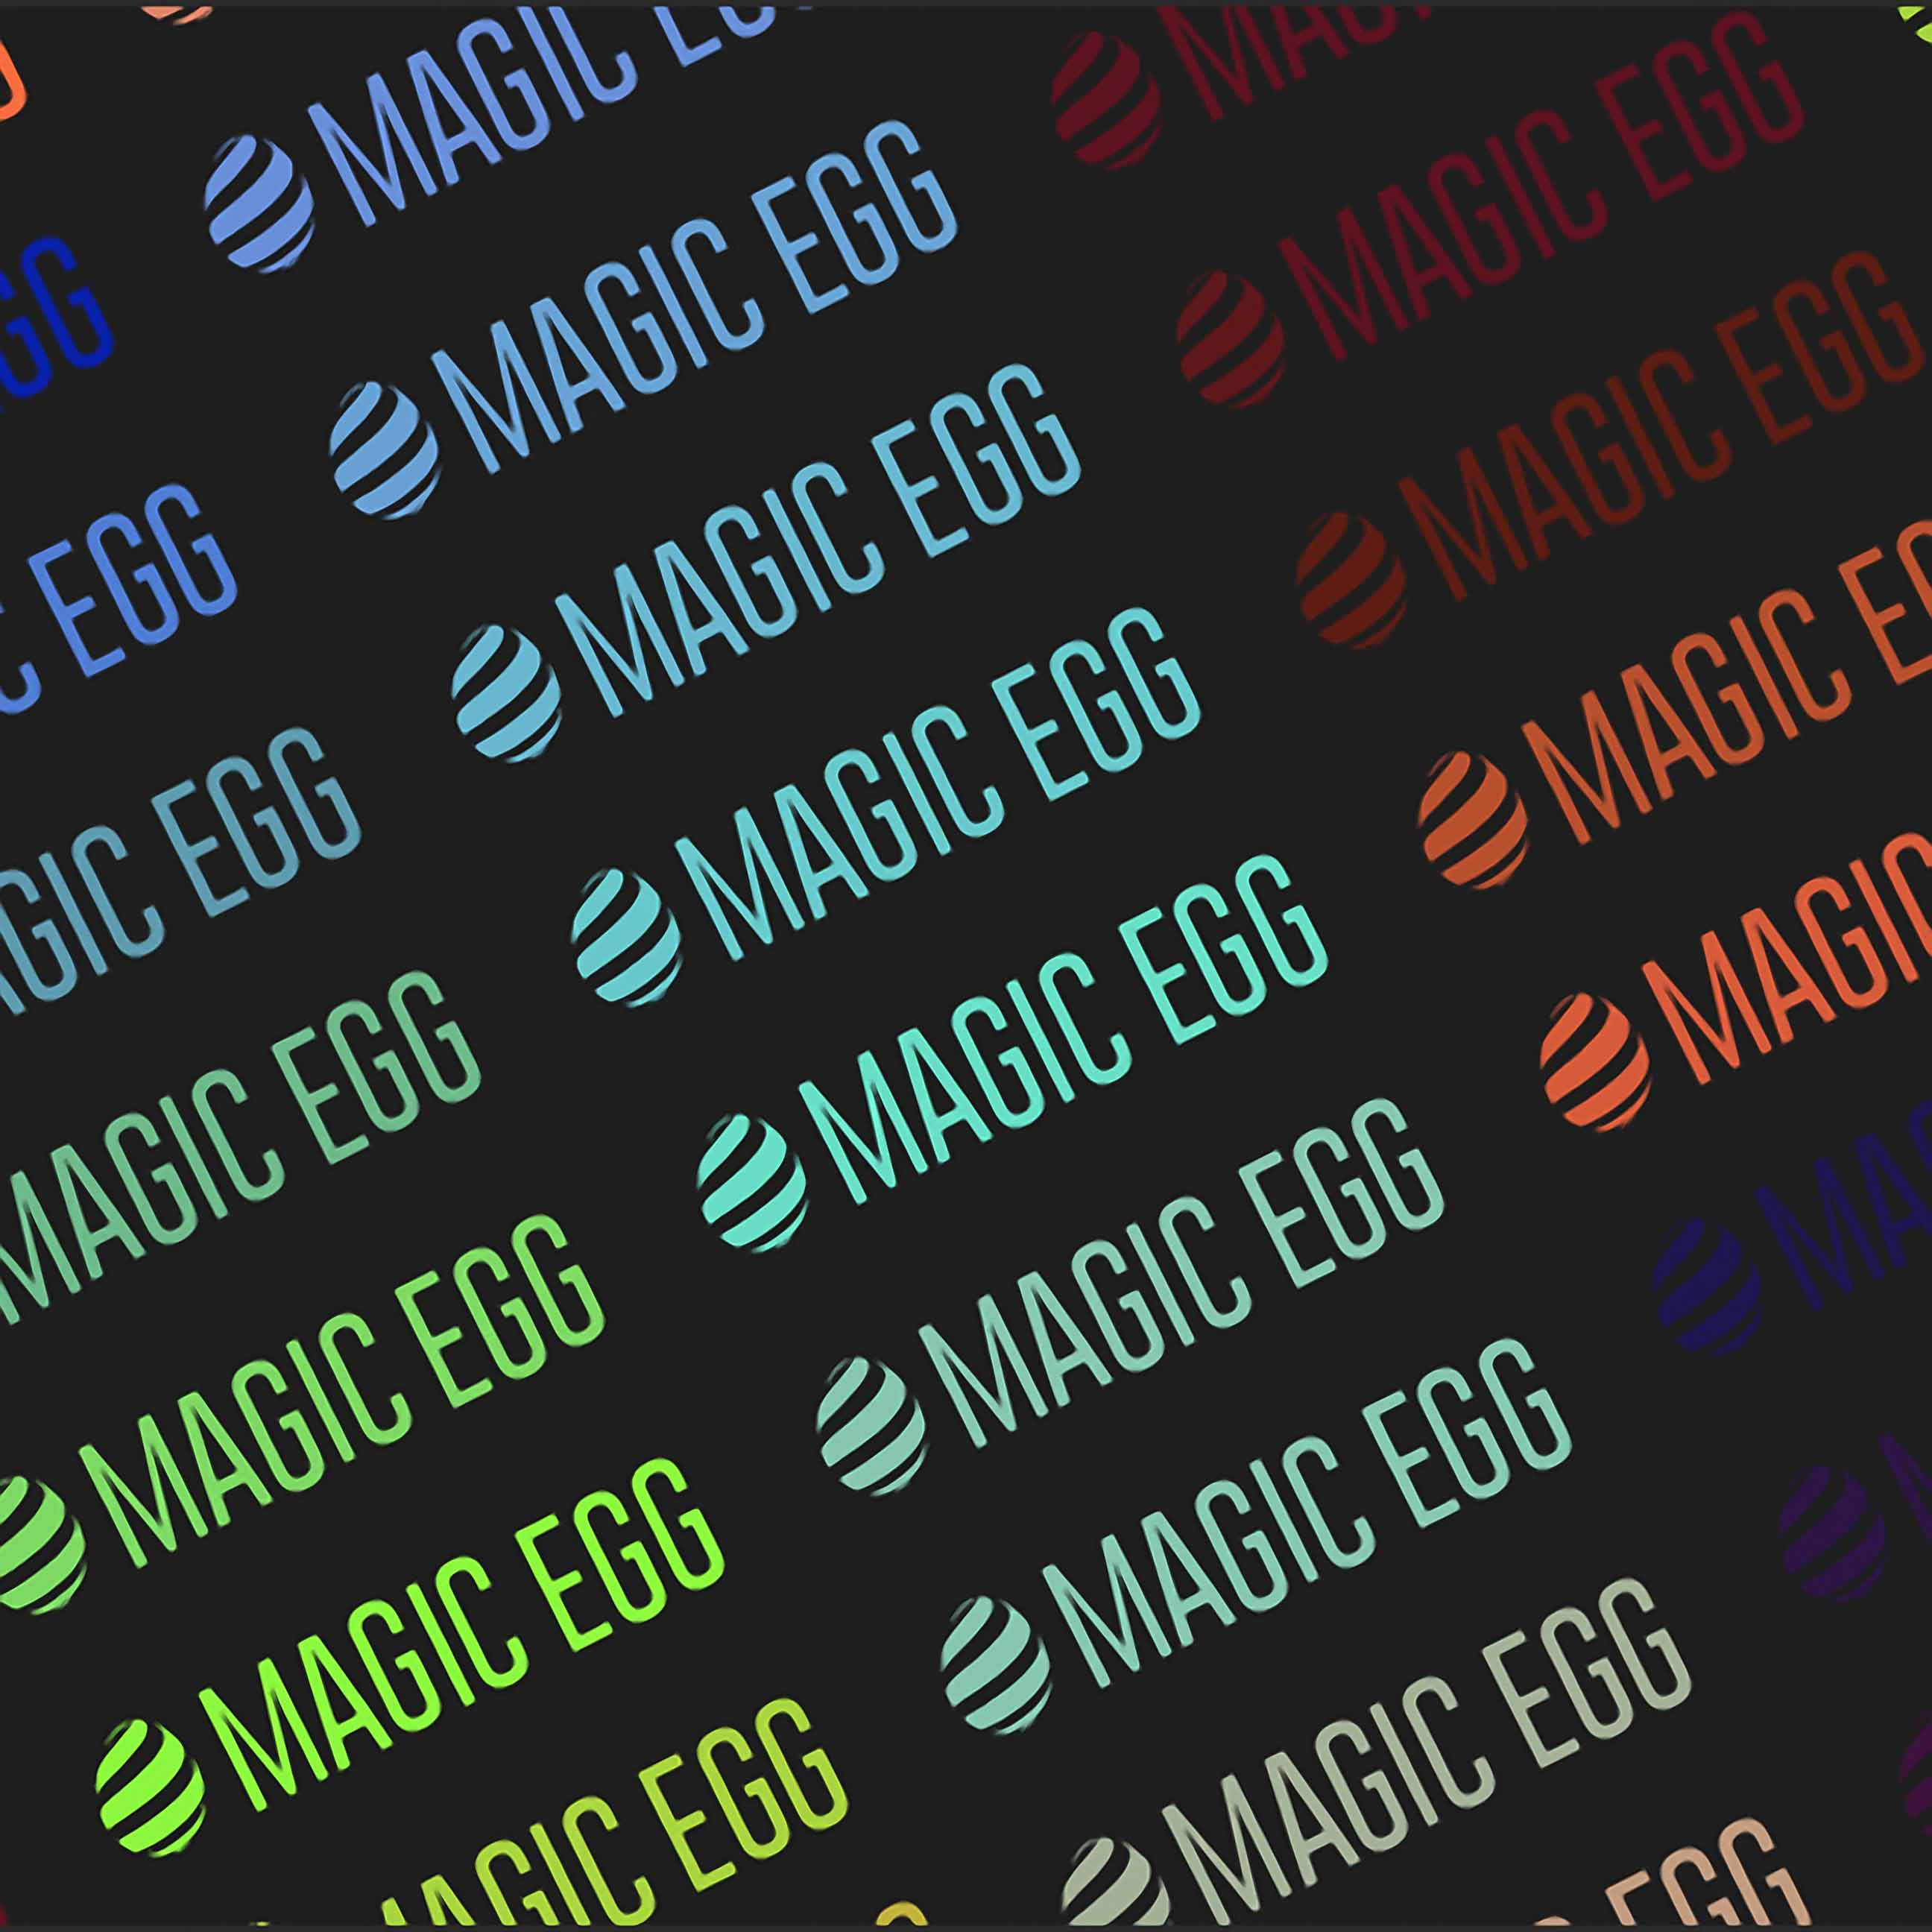 Magic Egg preview panel